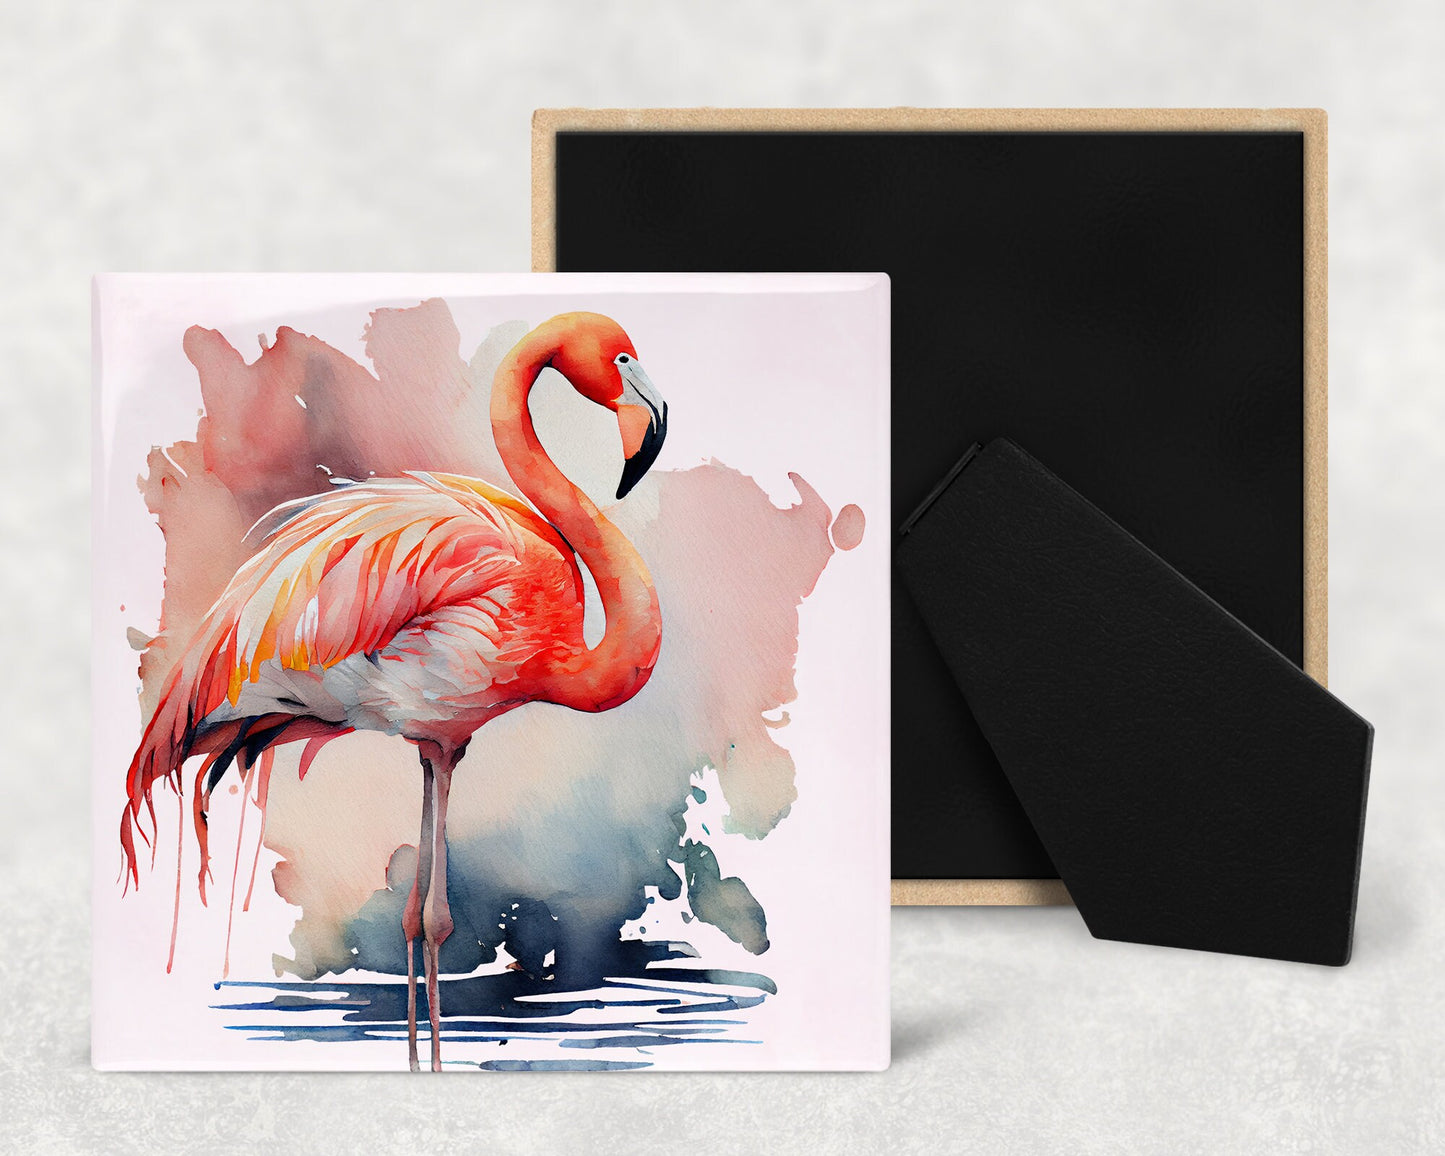 Watercolor Flamingo Art Decorative Ceramic Tile with Optional Easel Back - Available in 3 Sizes